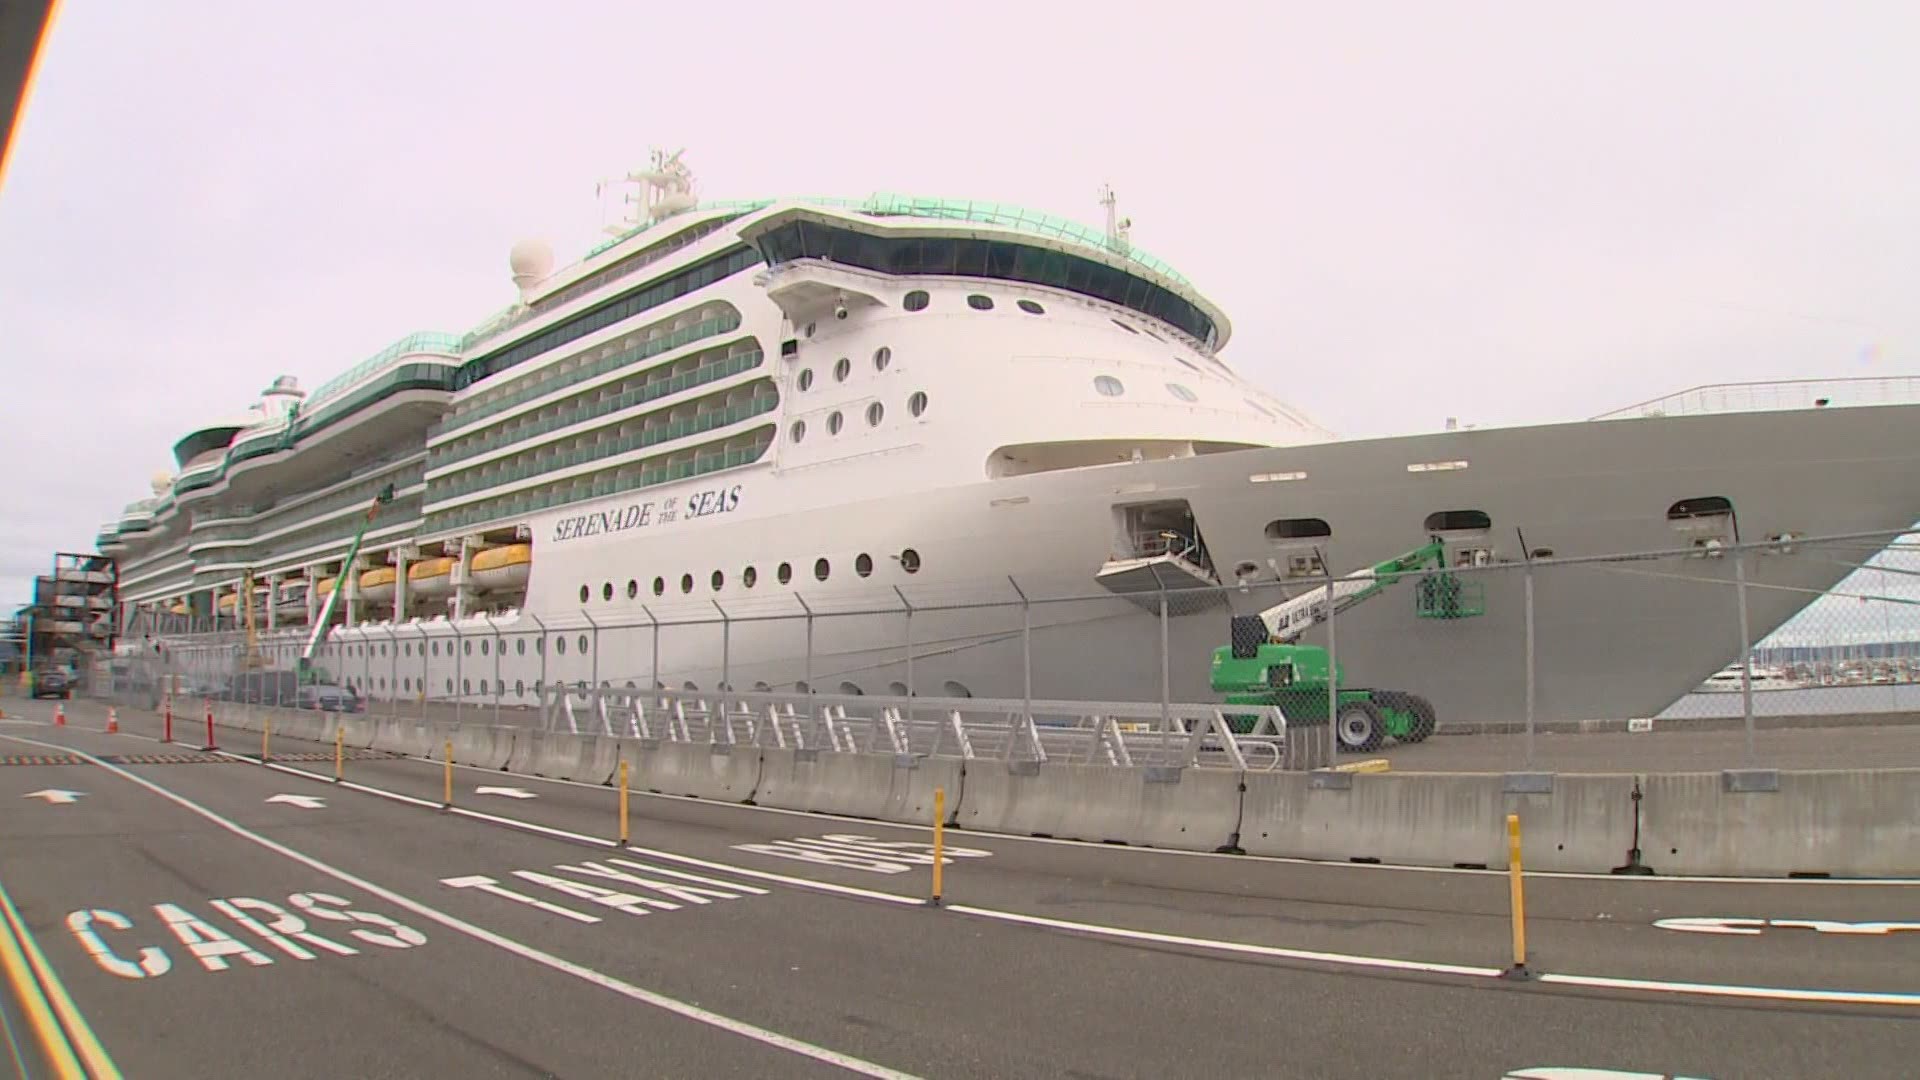 Royal Caribbean’s Serenade of the Seas is set to be the first cruise ship to set sail from Seattle since the start of the pandemic.